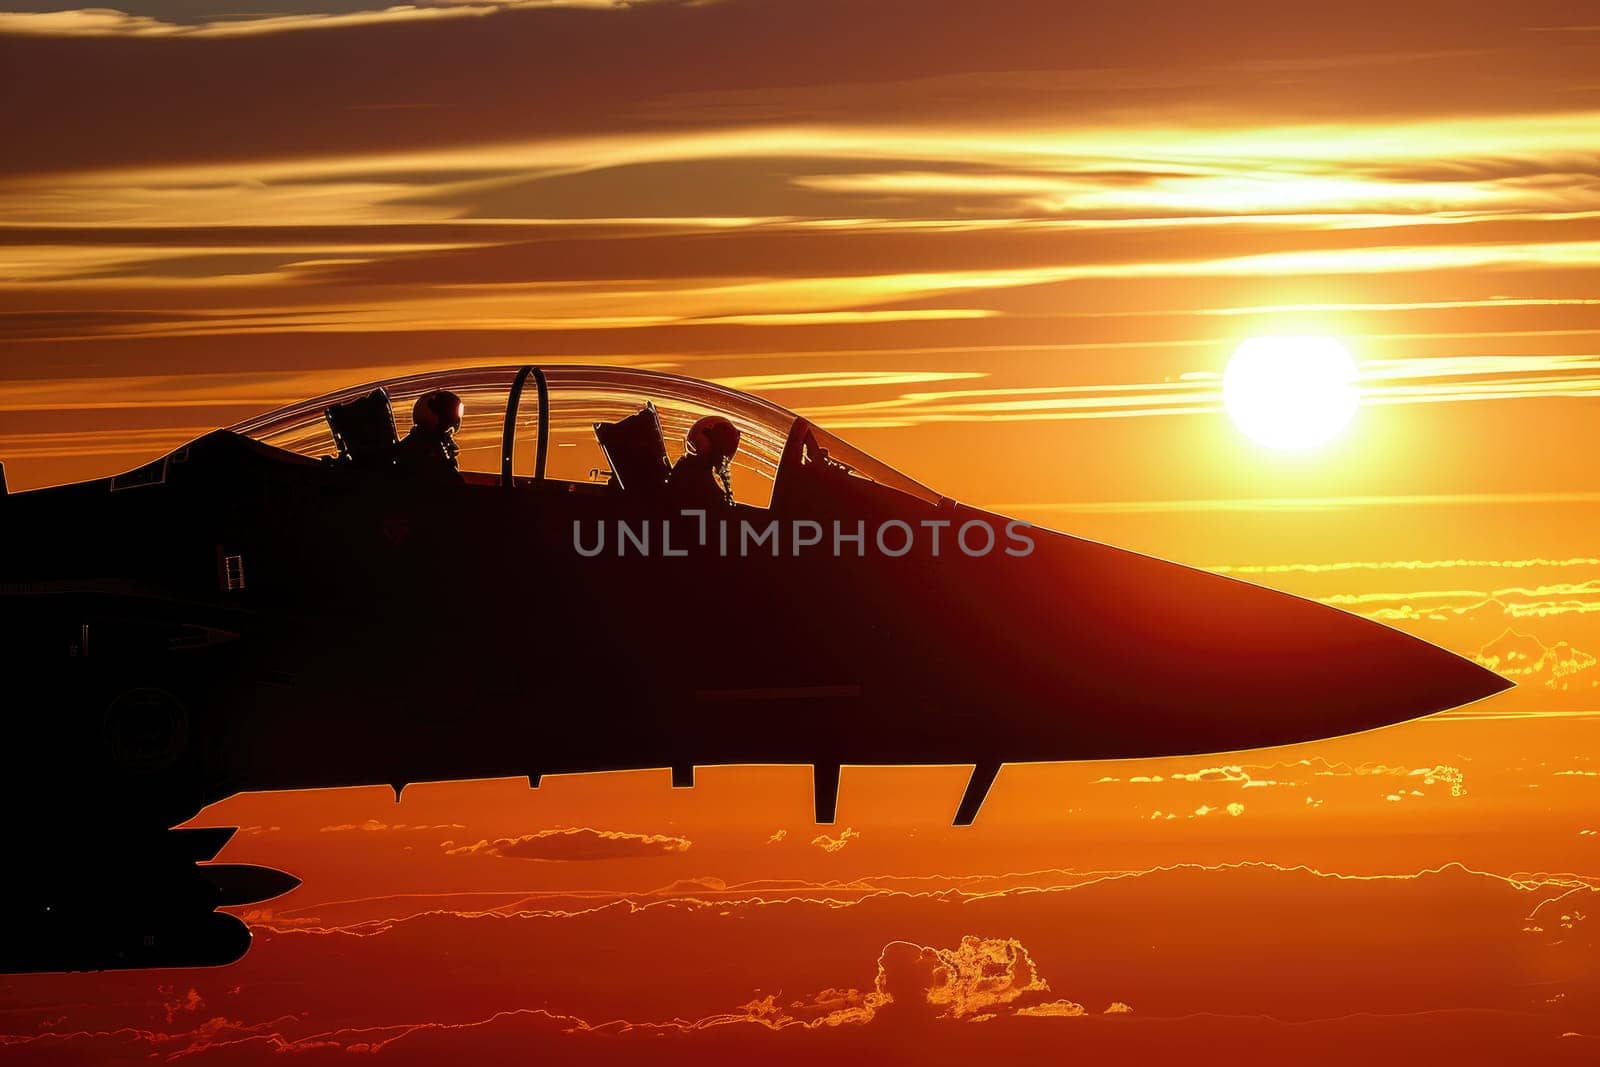 A silhouette of a fighter jet against a vibrant orange sunset, capturing the beauty and power of military aircraft. by Chawagen